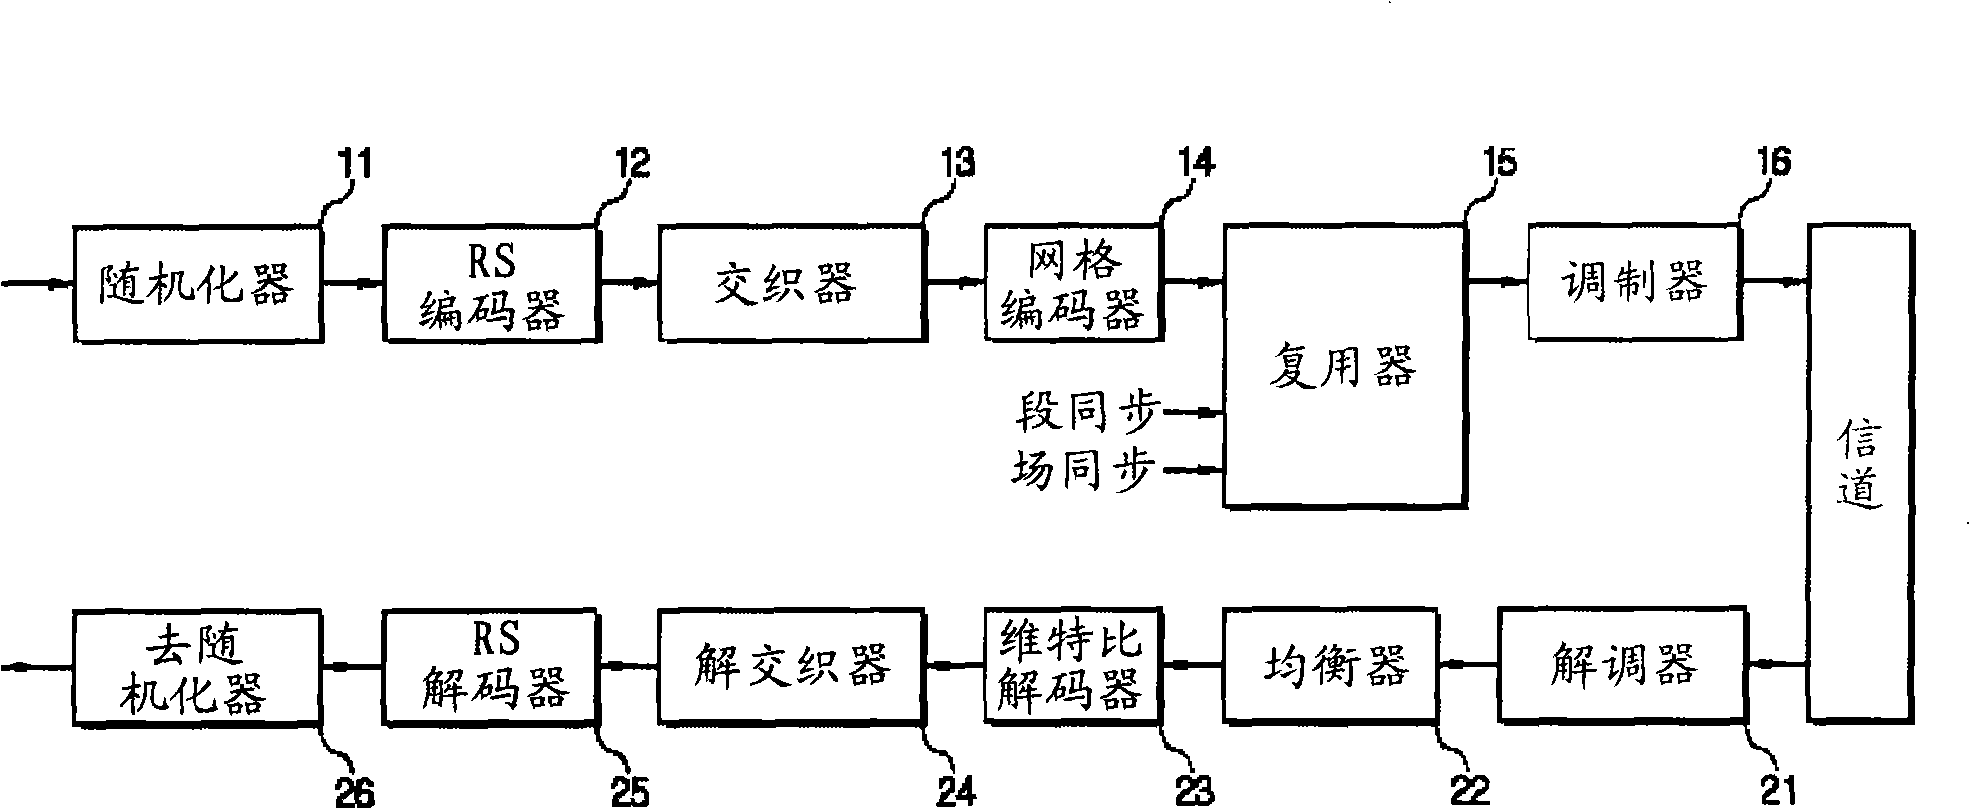 Dual transmission stream processing device and method